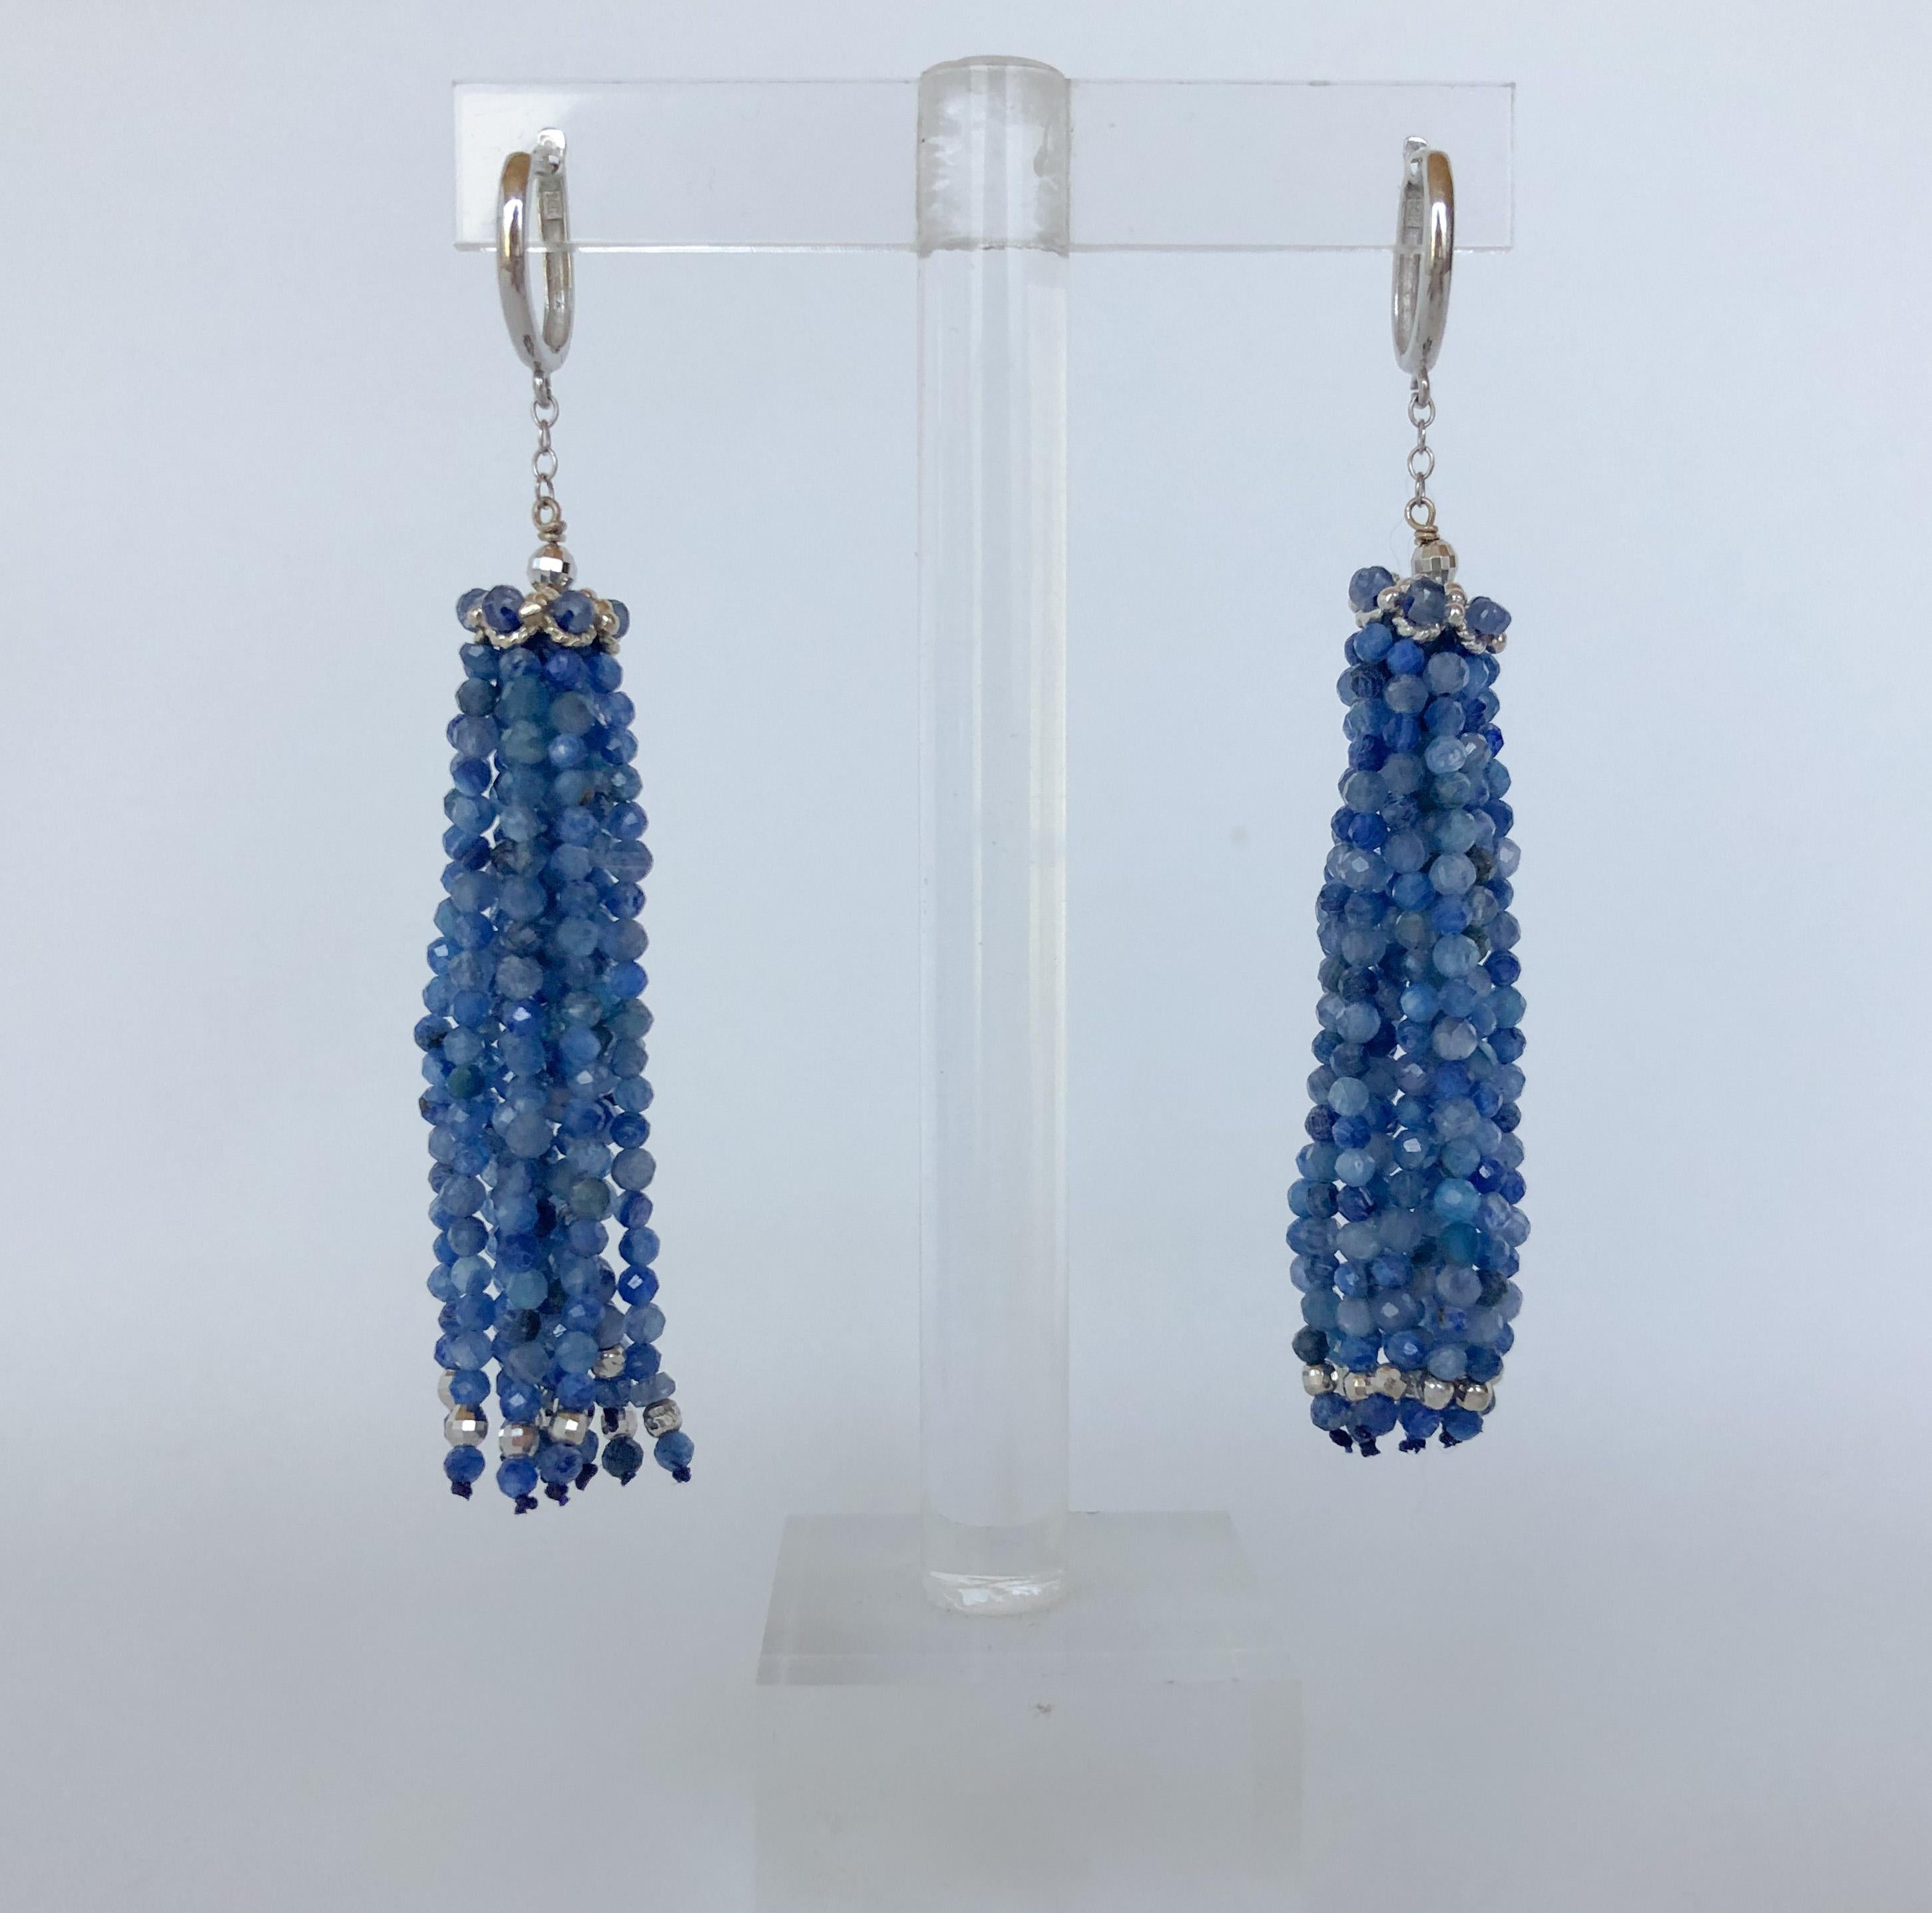 These gorgeous earrings are made with different shades of kyanite beads and 14k faceted beads. The top of the earring features a 14k white gold cup and the lever-backs and chain are also made of 14k white gold. They earrings are about 2.75 inches